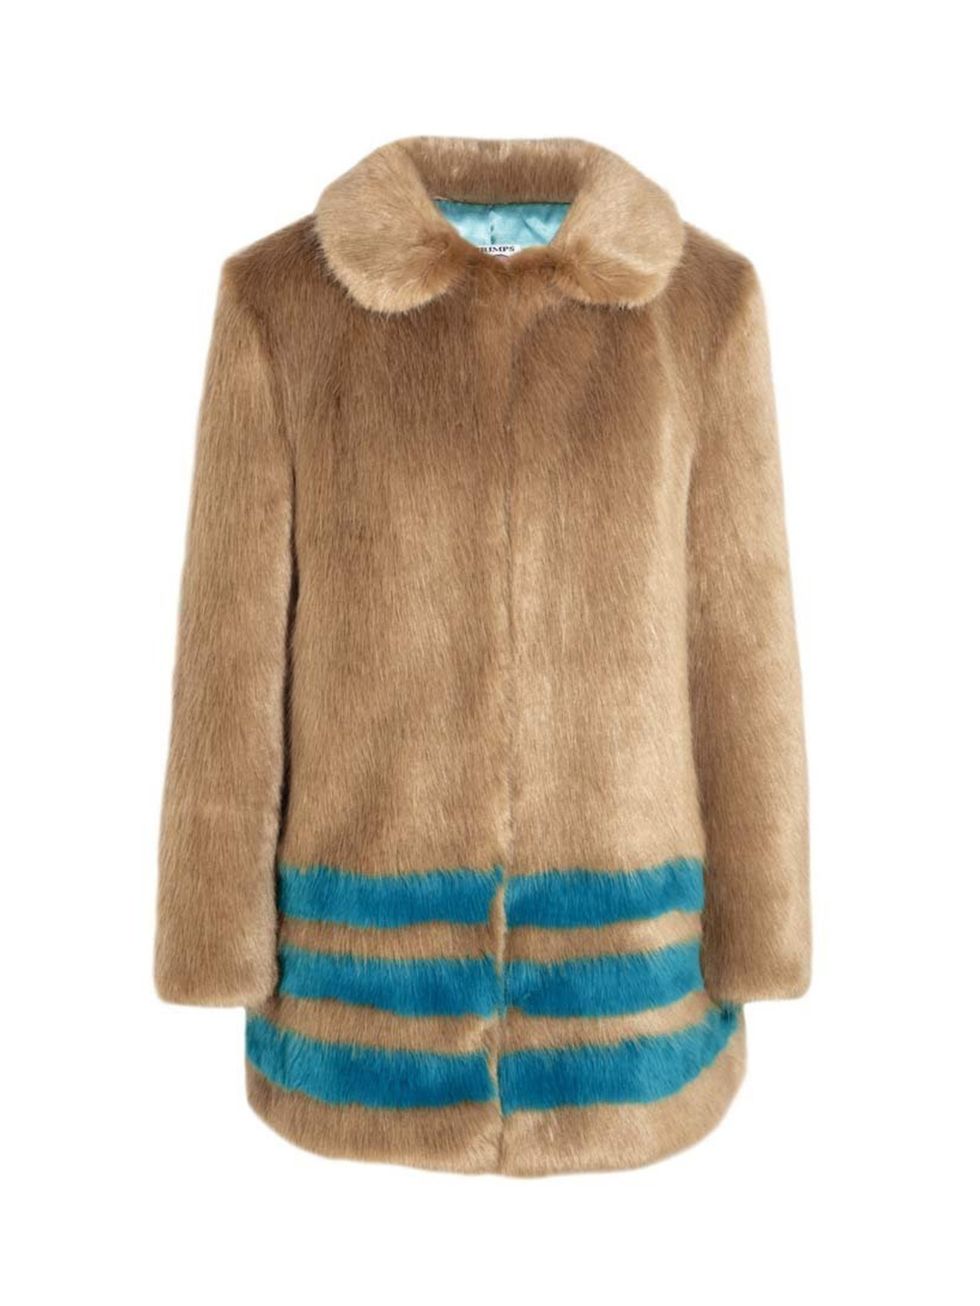 <p>The faux-fur trend is only going to get bigger next season, and Shrimps is the name to know. Get yours now and gloat come autumn.</p><p>Shrimps coat, £595 at <a href="http://www.net-a-porter.com/product/445459/Shrimps/wilma-faux-fur-coat">Net-A-Porter<